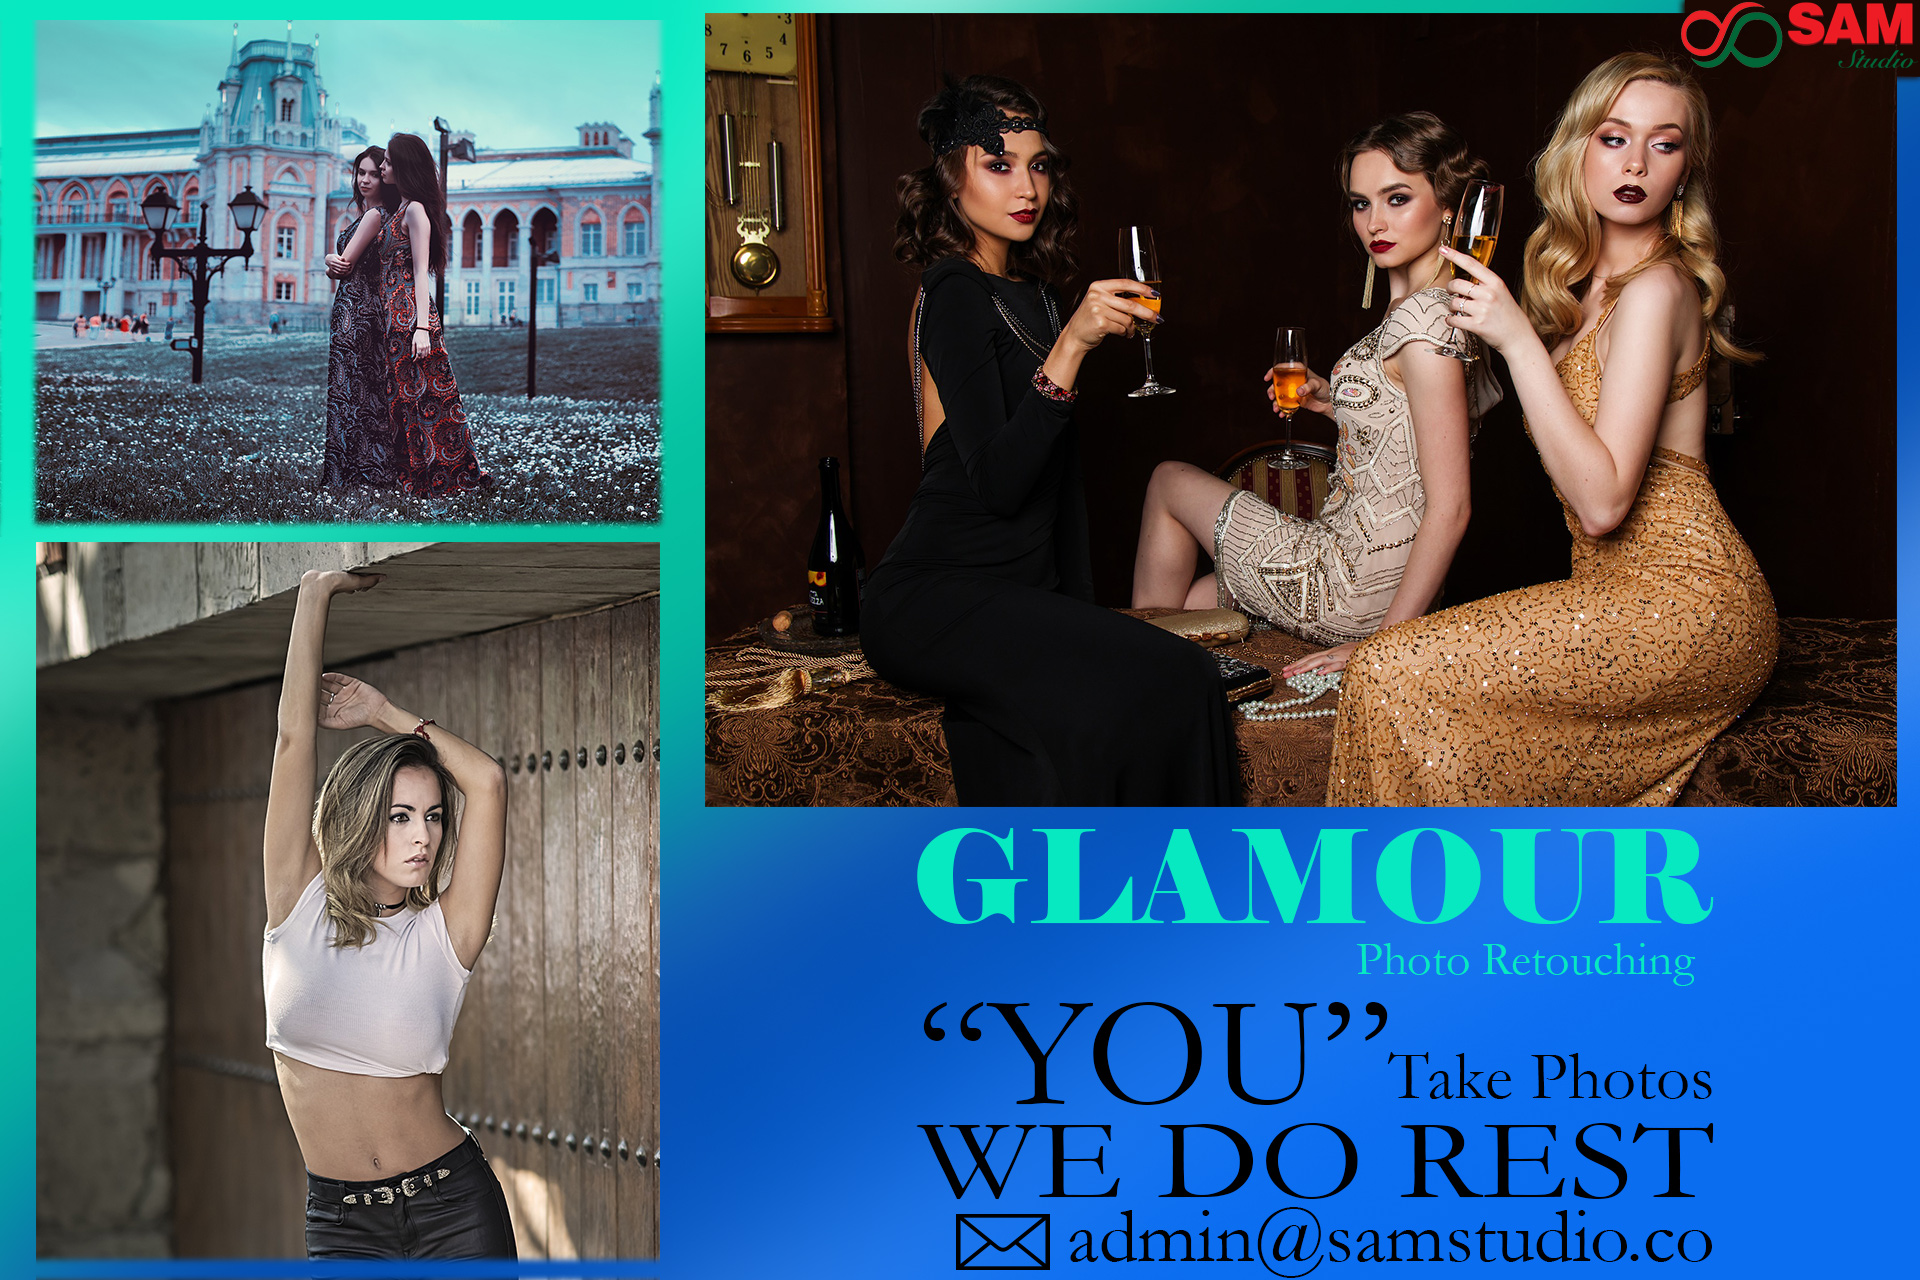 Glamour Photo Retouching Services